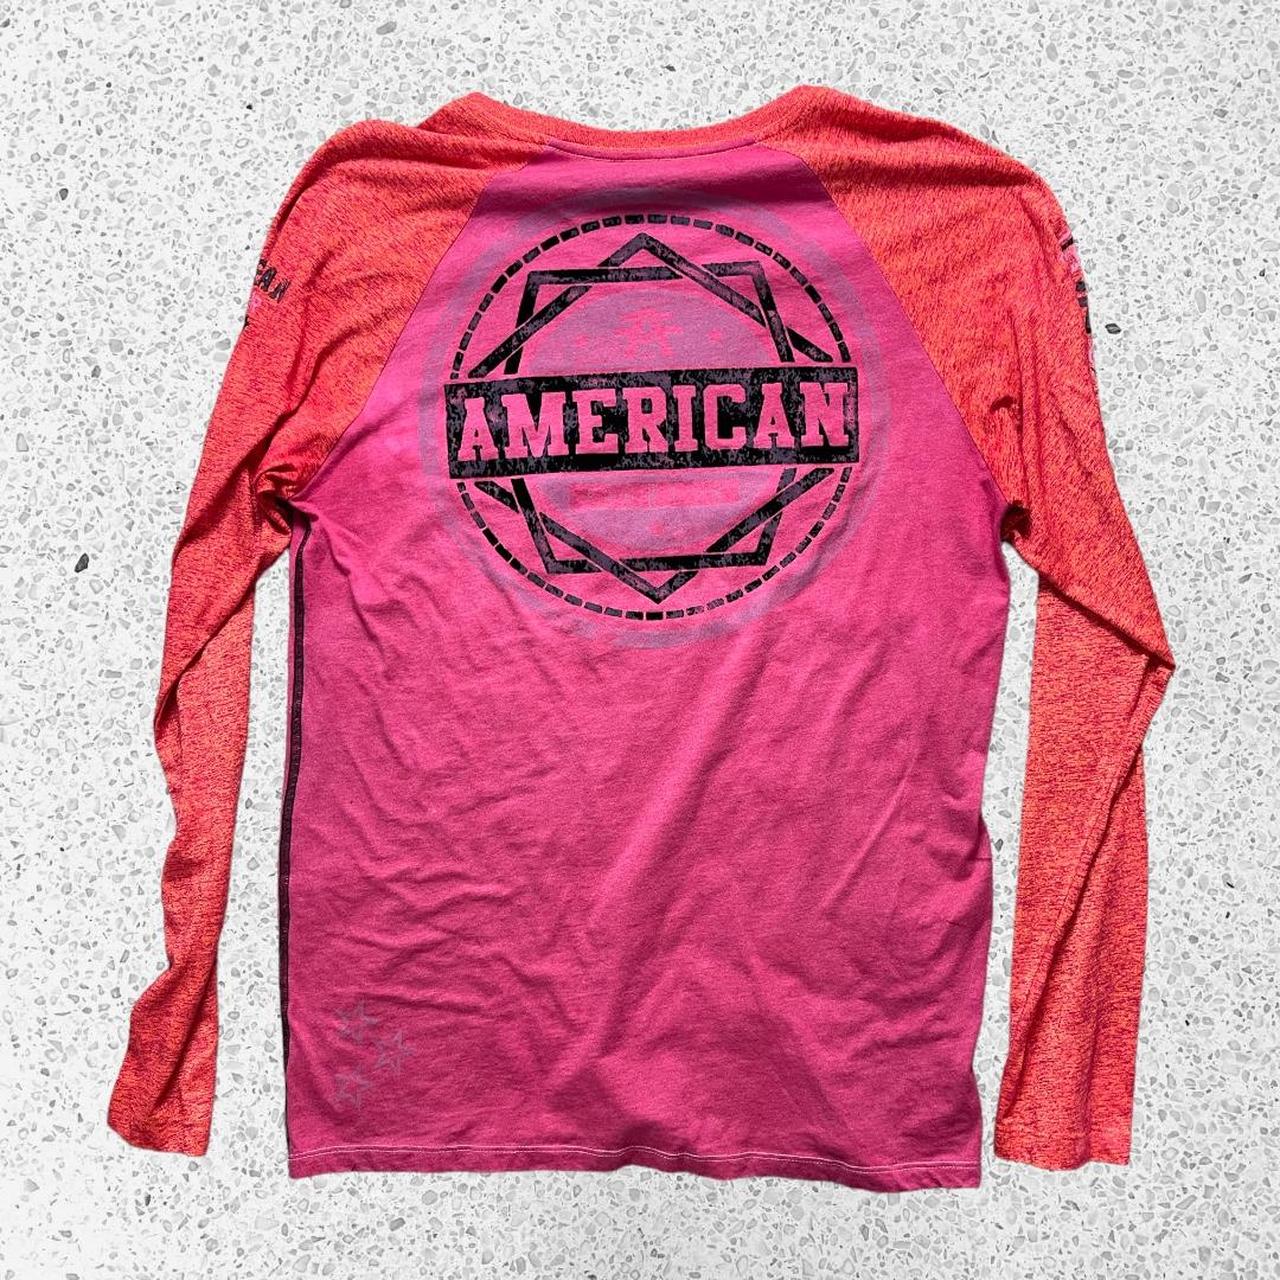 Product Image 2 - American Fighter long sleeve shirt